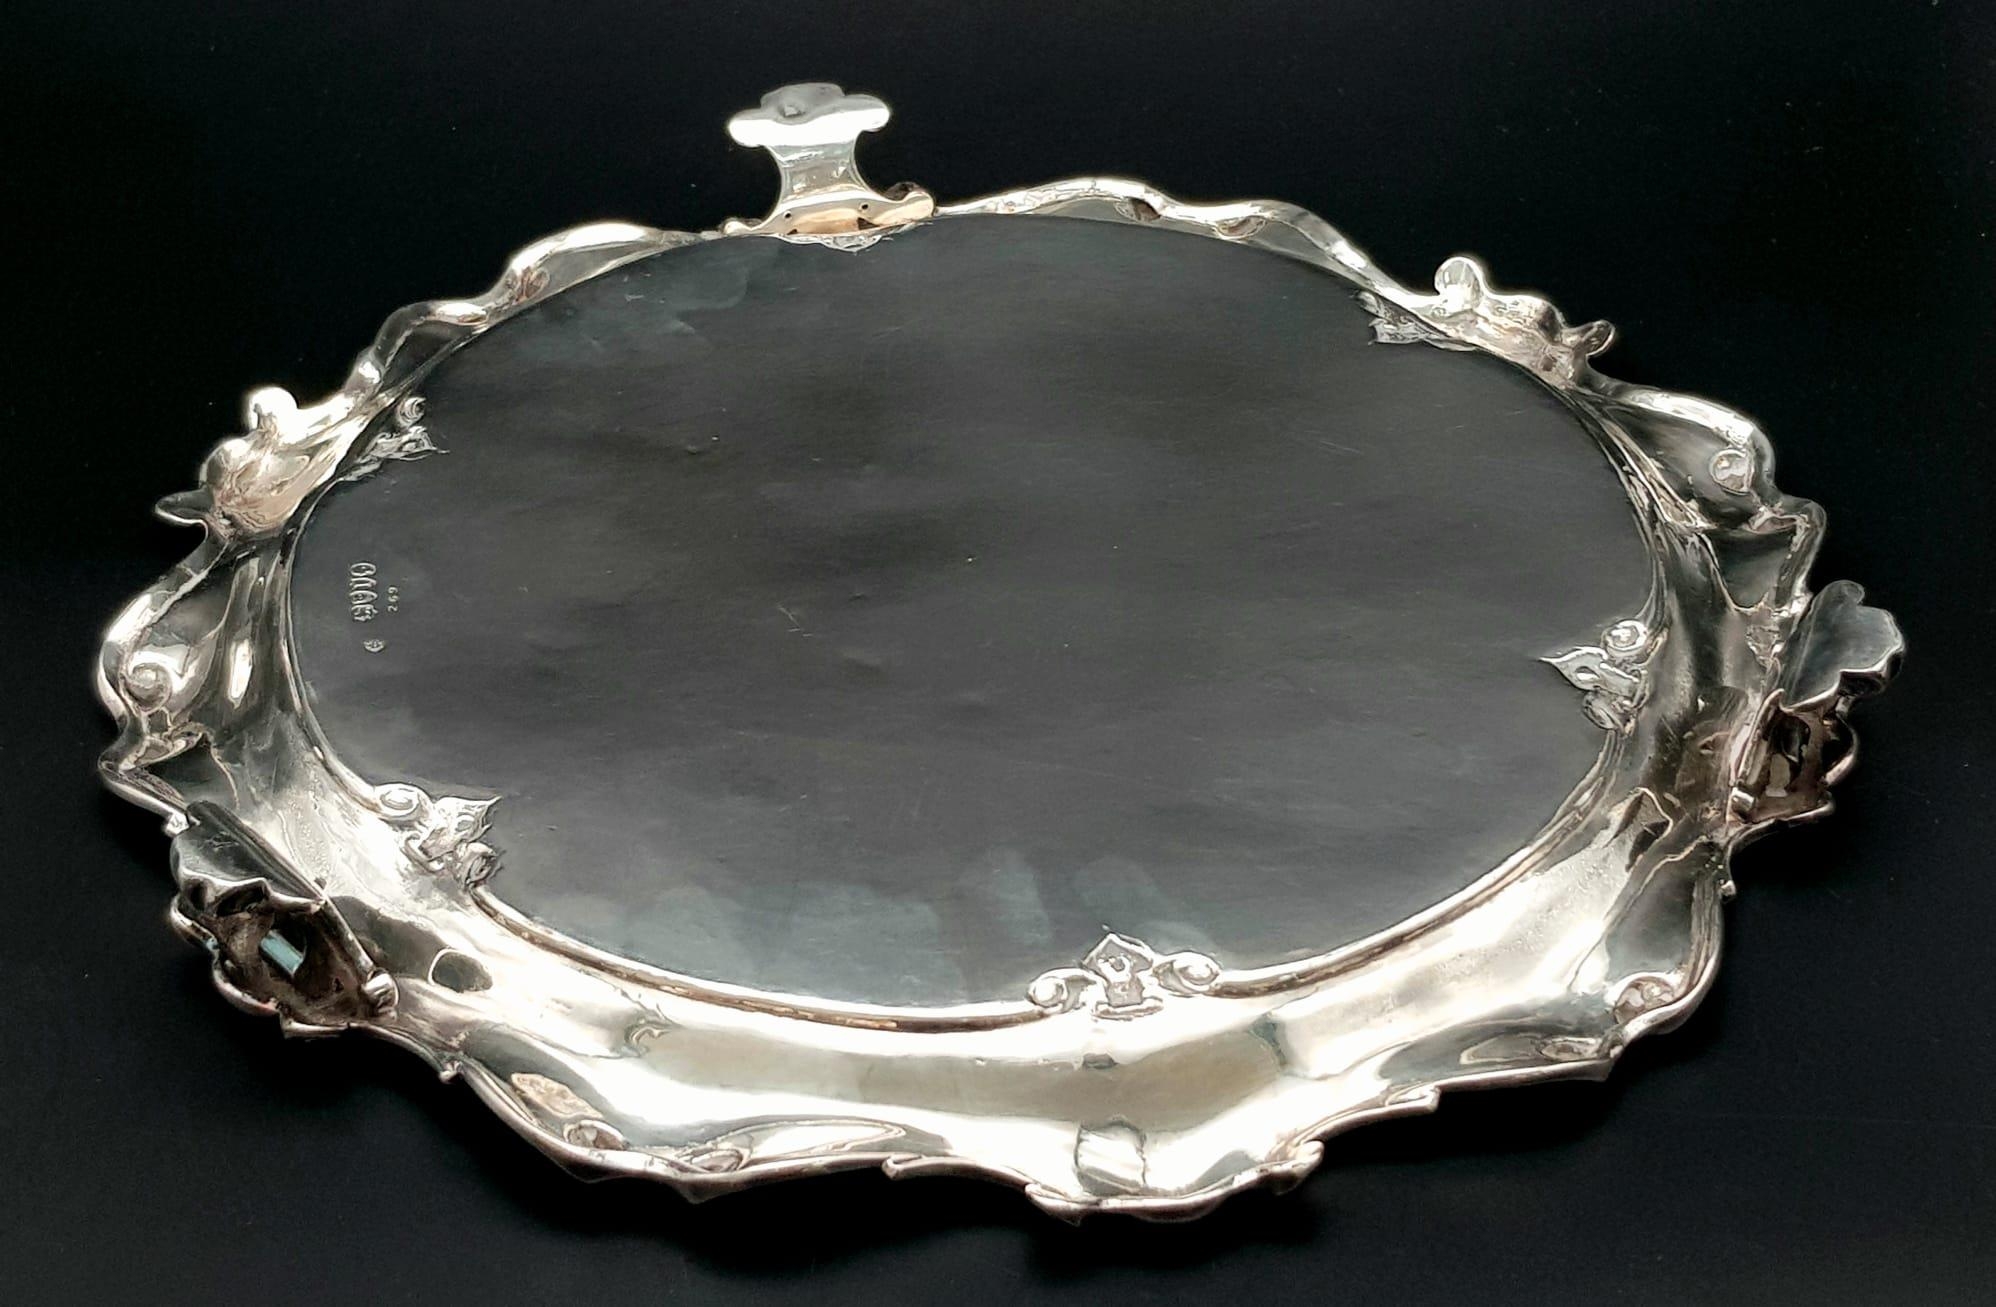 A 761gms solid silver Salva with scrolled edges and hand chased intricate decoration and - Image 2 of 6